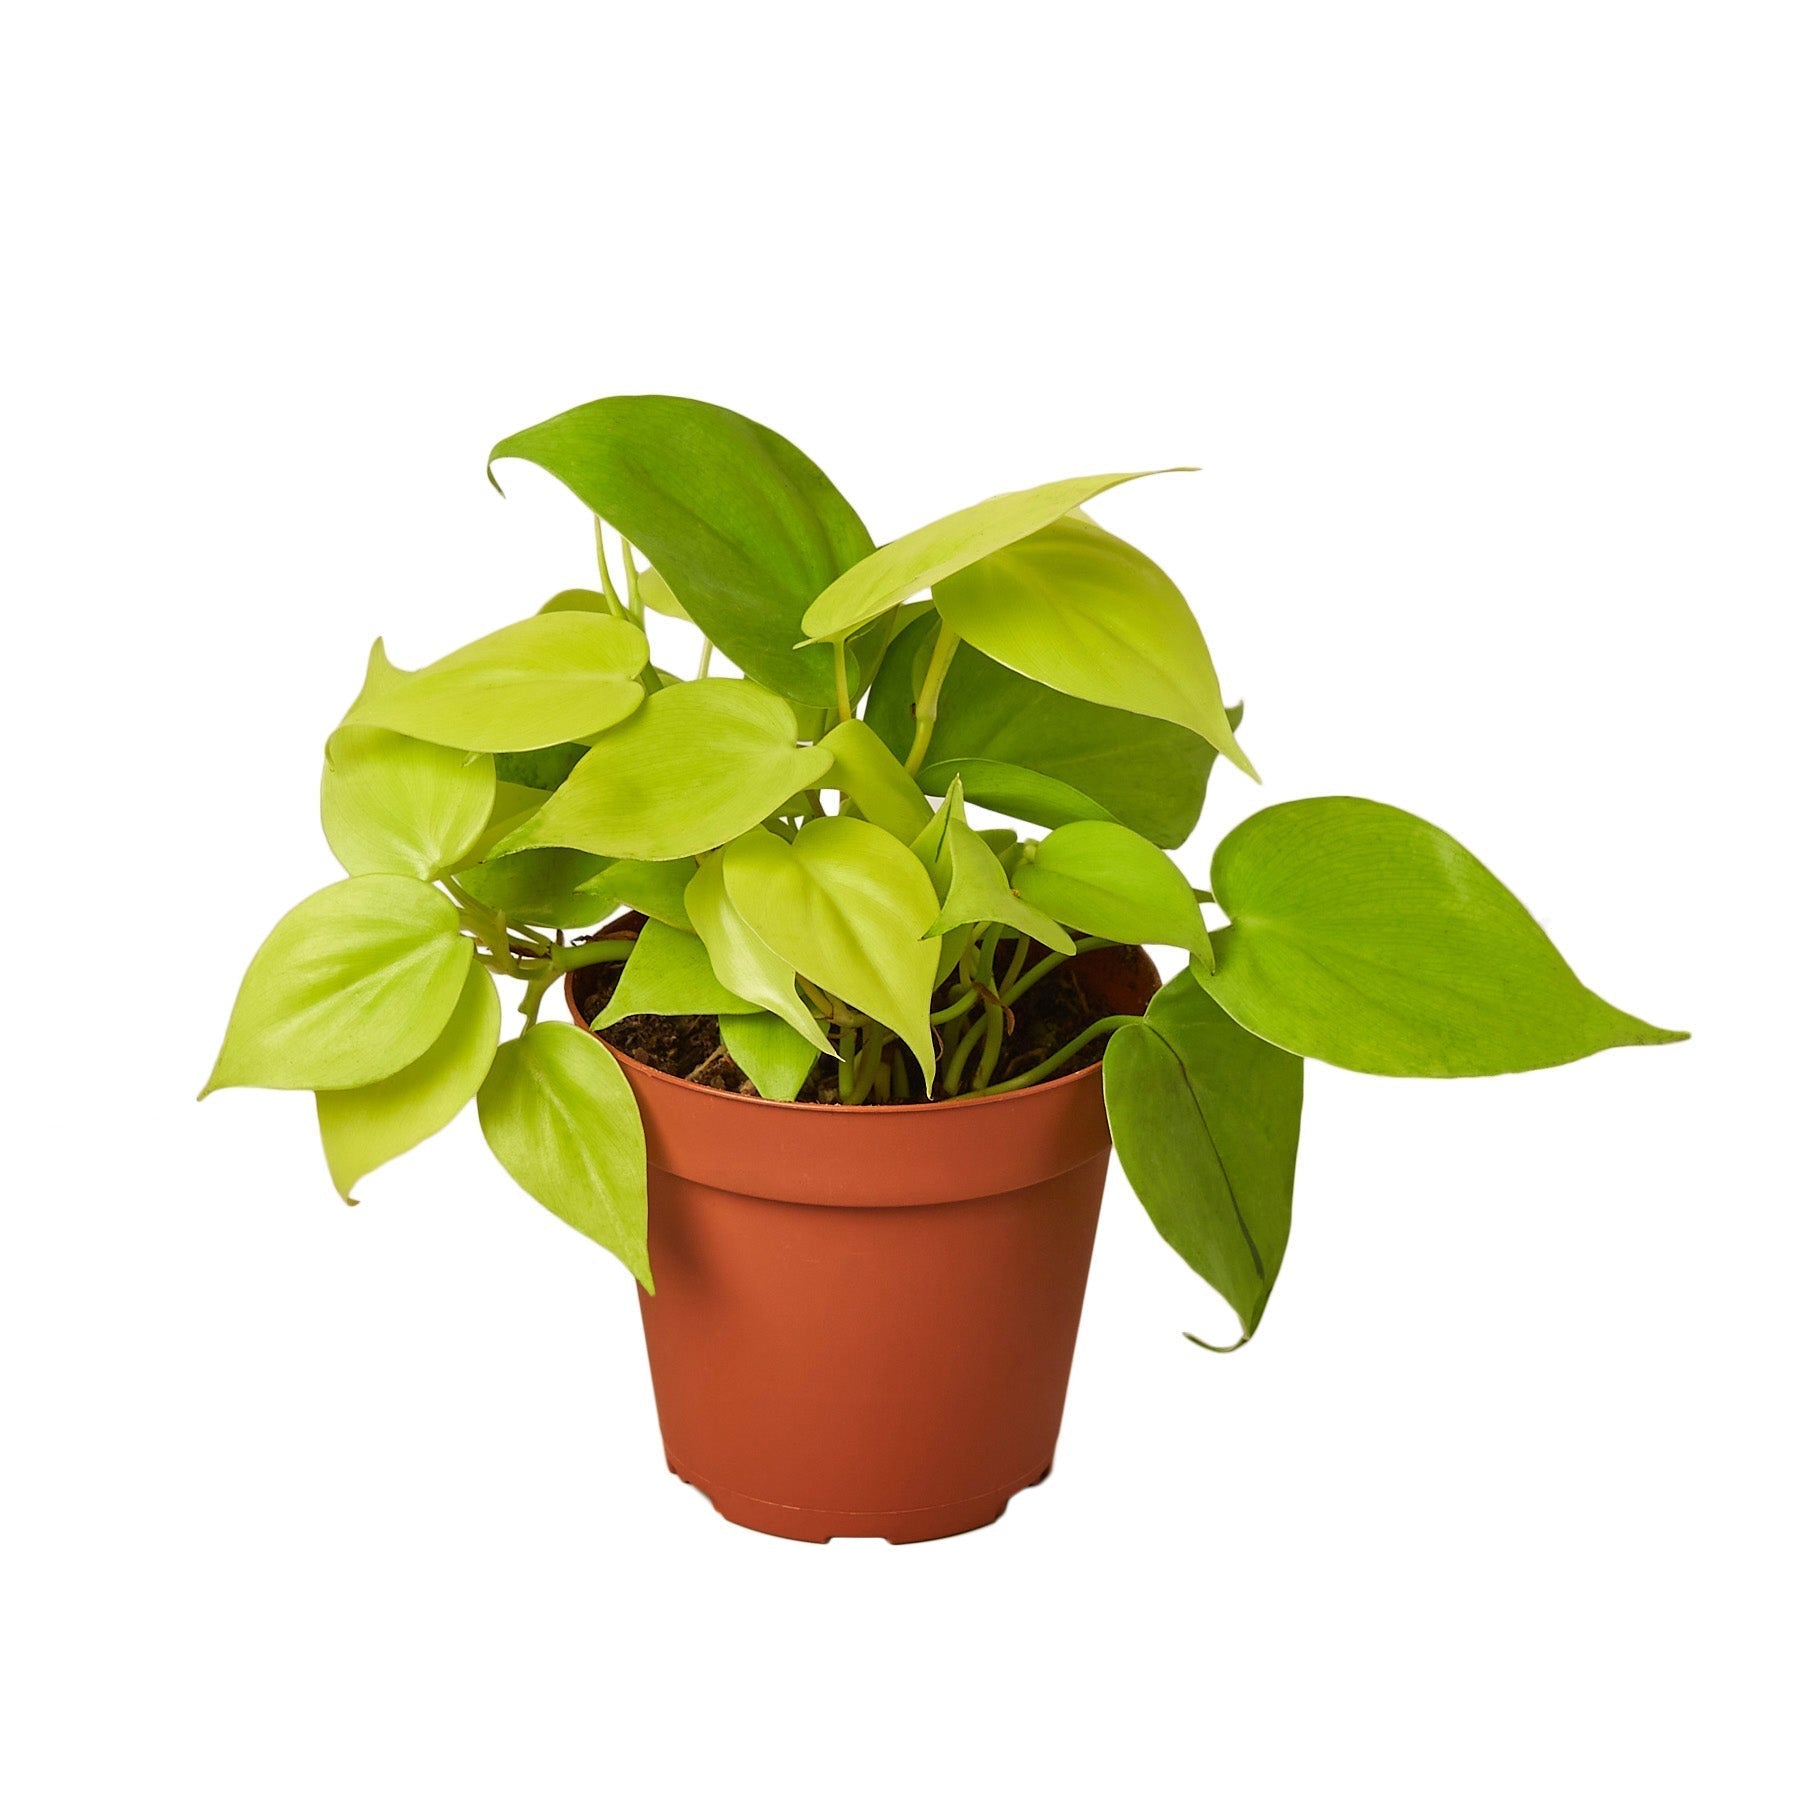 Philodendron 'Neon' - 6" Pot - NURSERY POT ONLY - One Beleaf Away Plant Studio